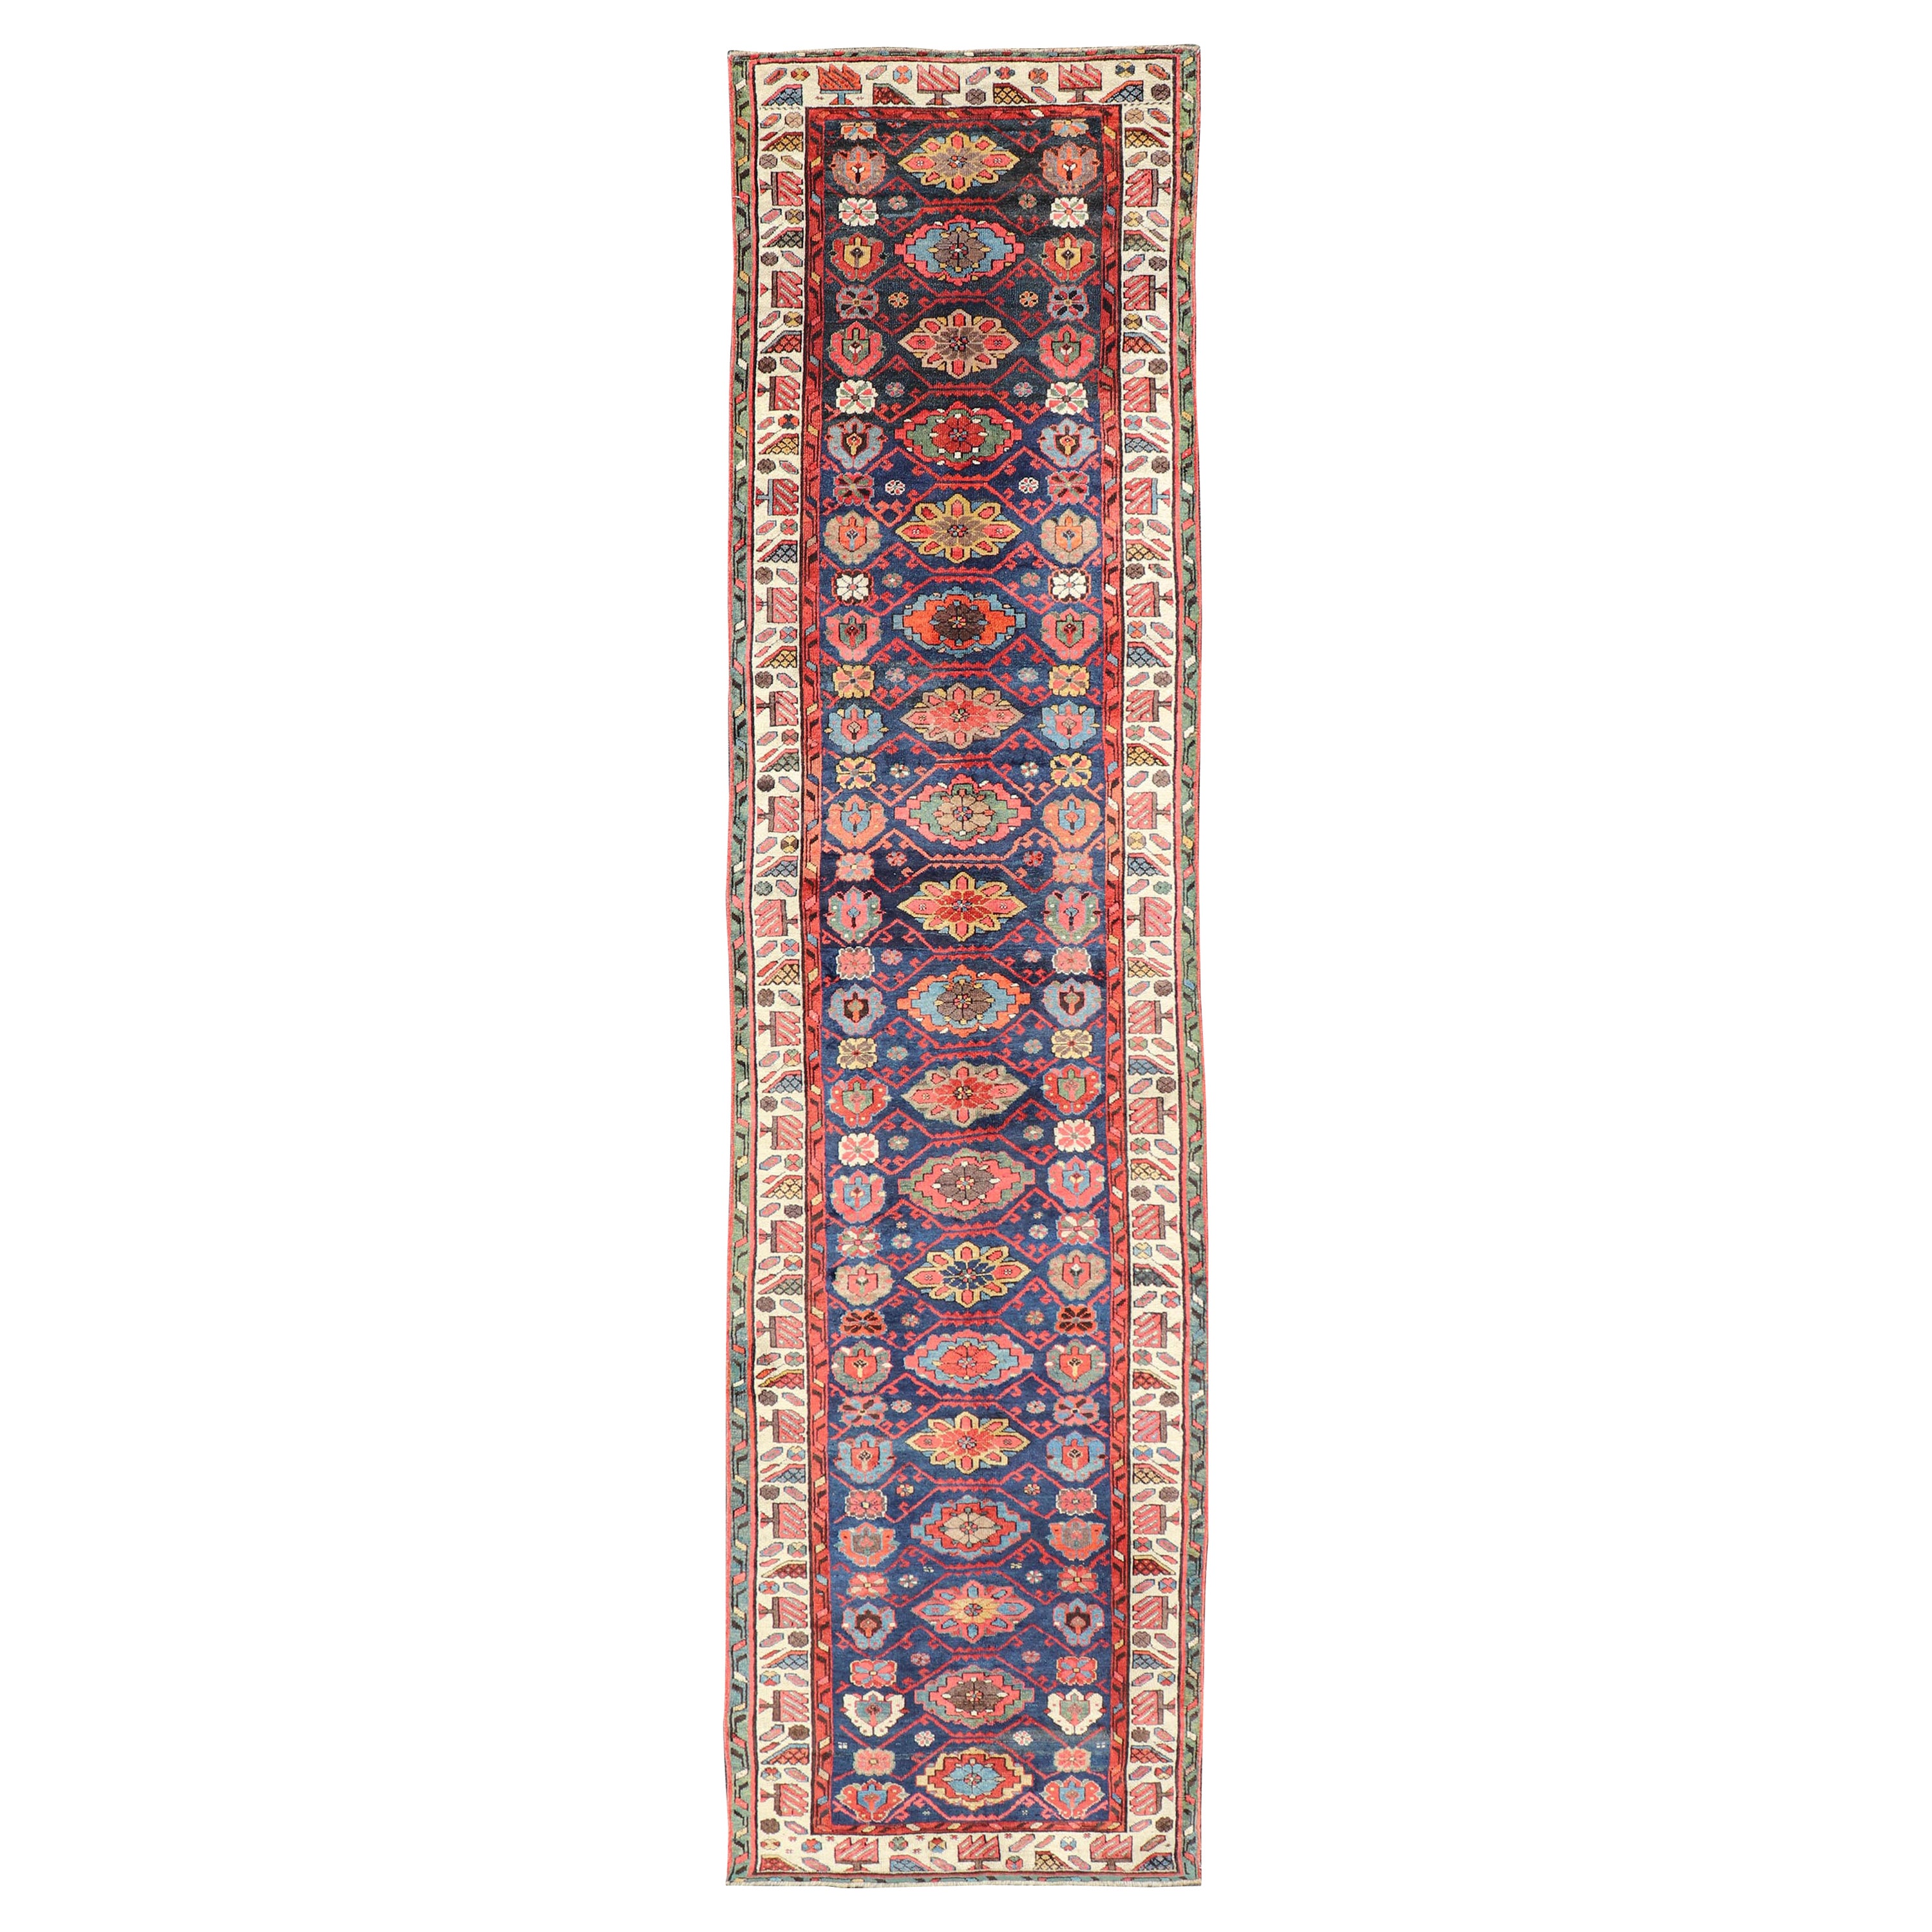 Colorful Antique N.W. Persian Runner with Sub-Geometric All-Over Floral Motifs 